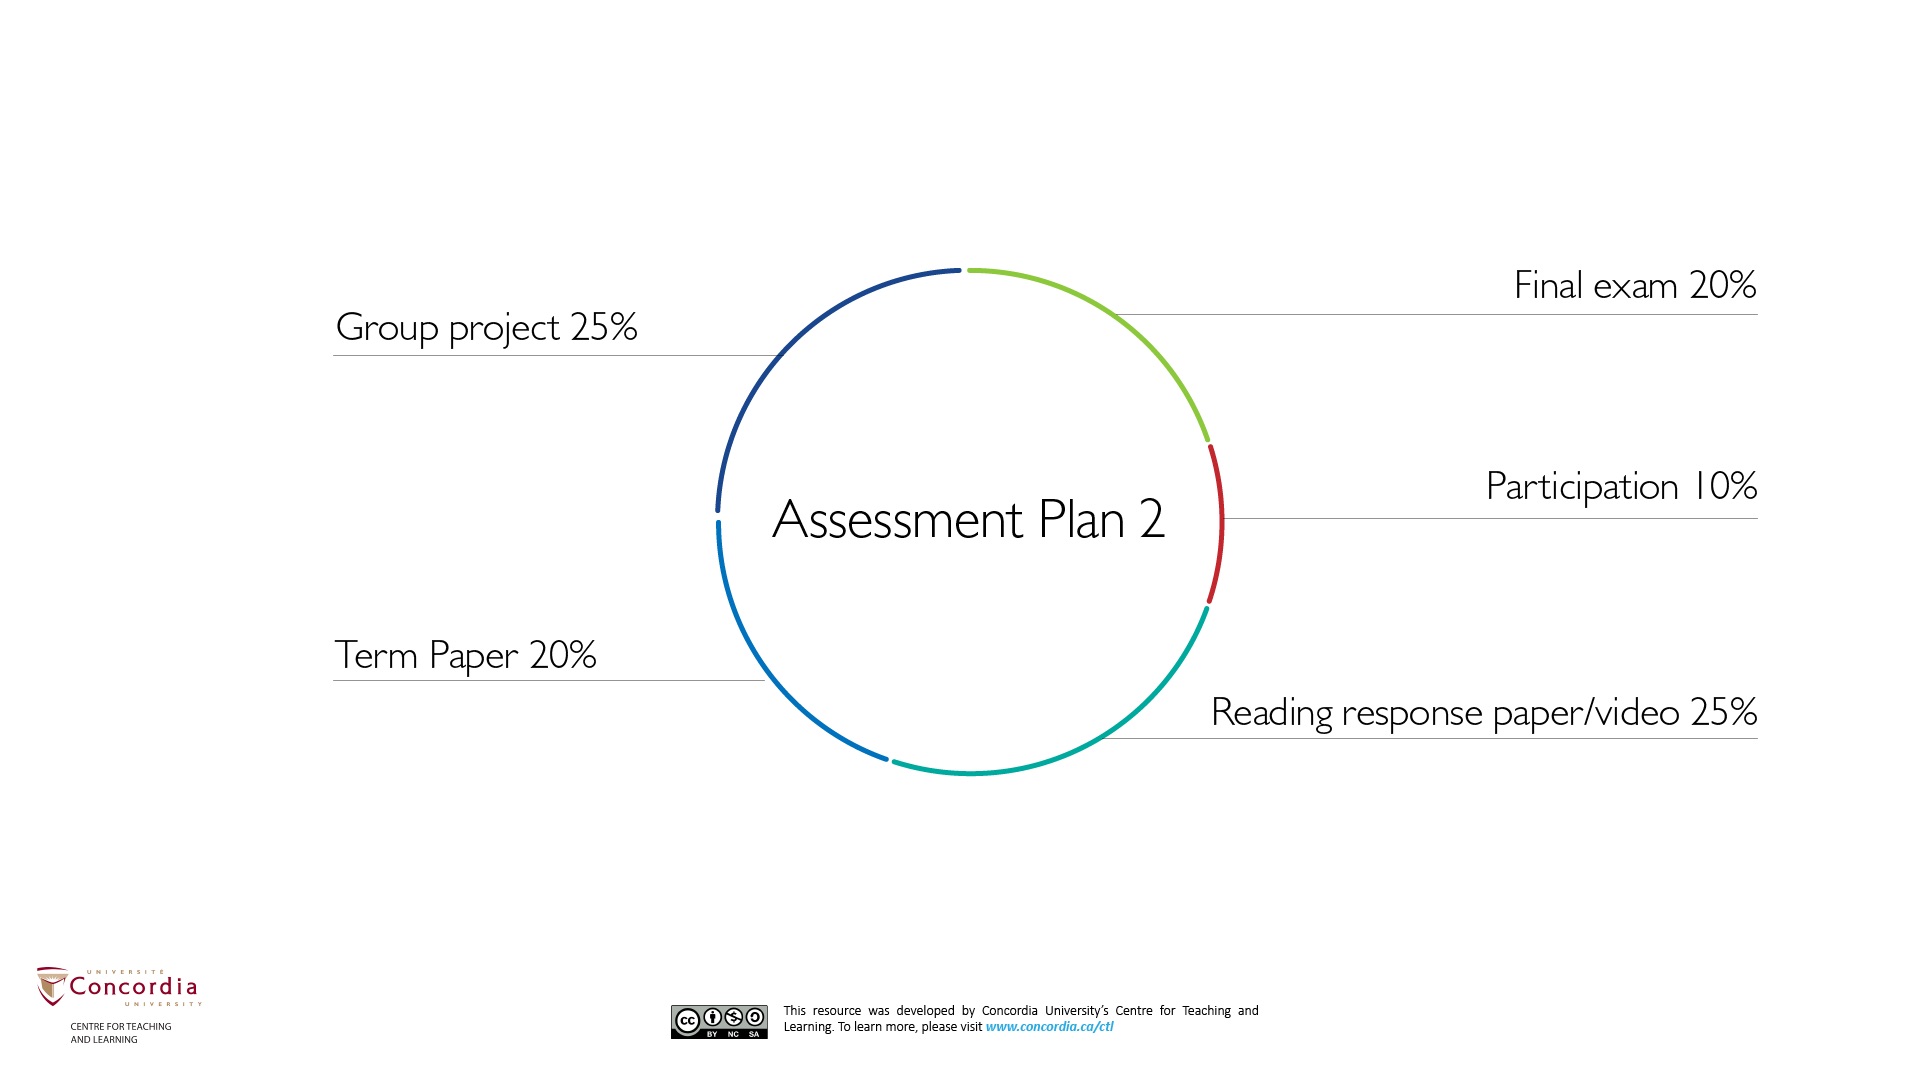 Assessment Plan 2 is an example of an assessment plan divided into 5 evaluations: a Group project valued at 25% of total grade, a Term Paper at 20%, a Reading response paper/video at 25%, a Participation grade at 10% and a Final Exam worth 20% for a total grade of 100%.